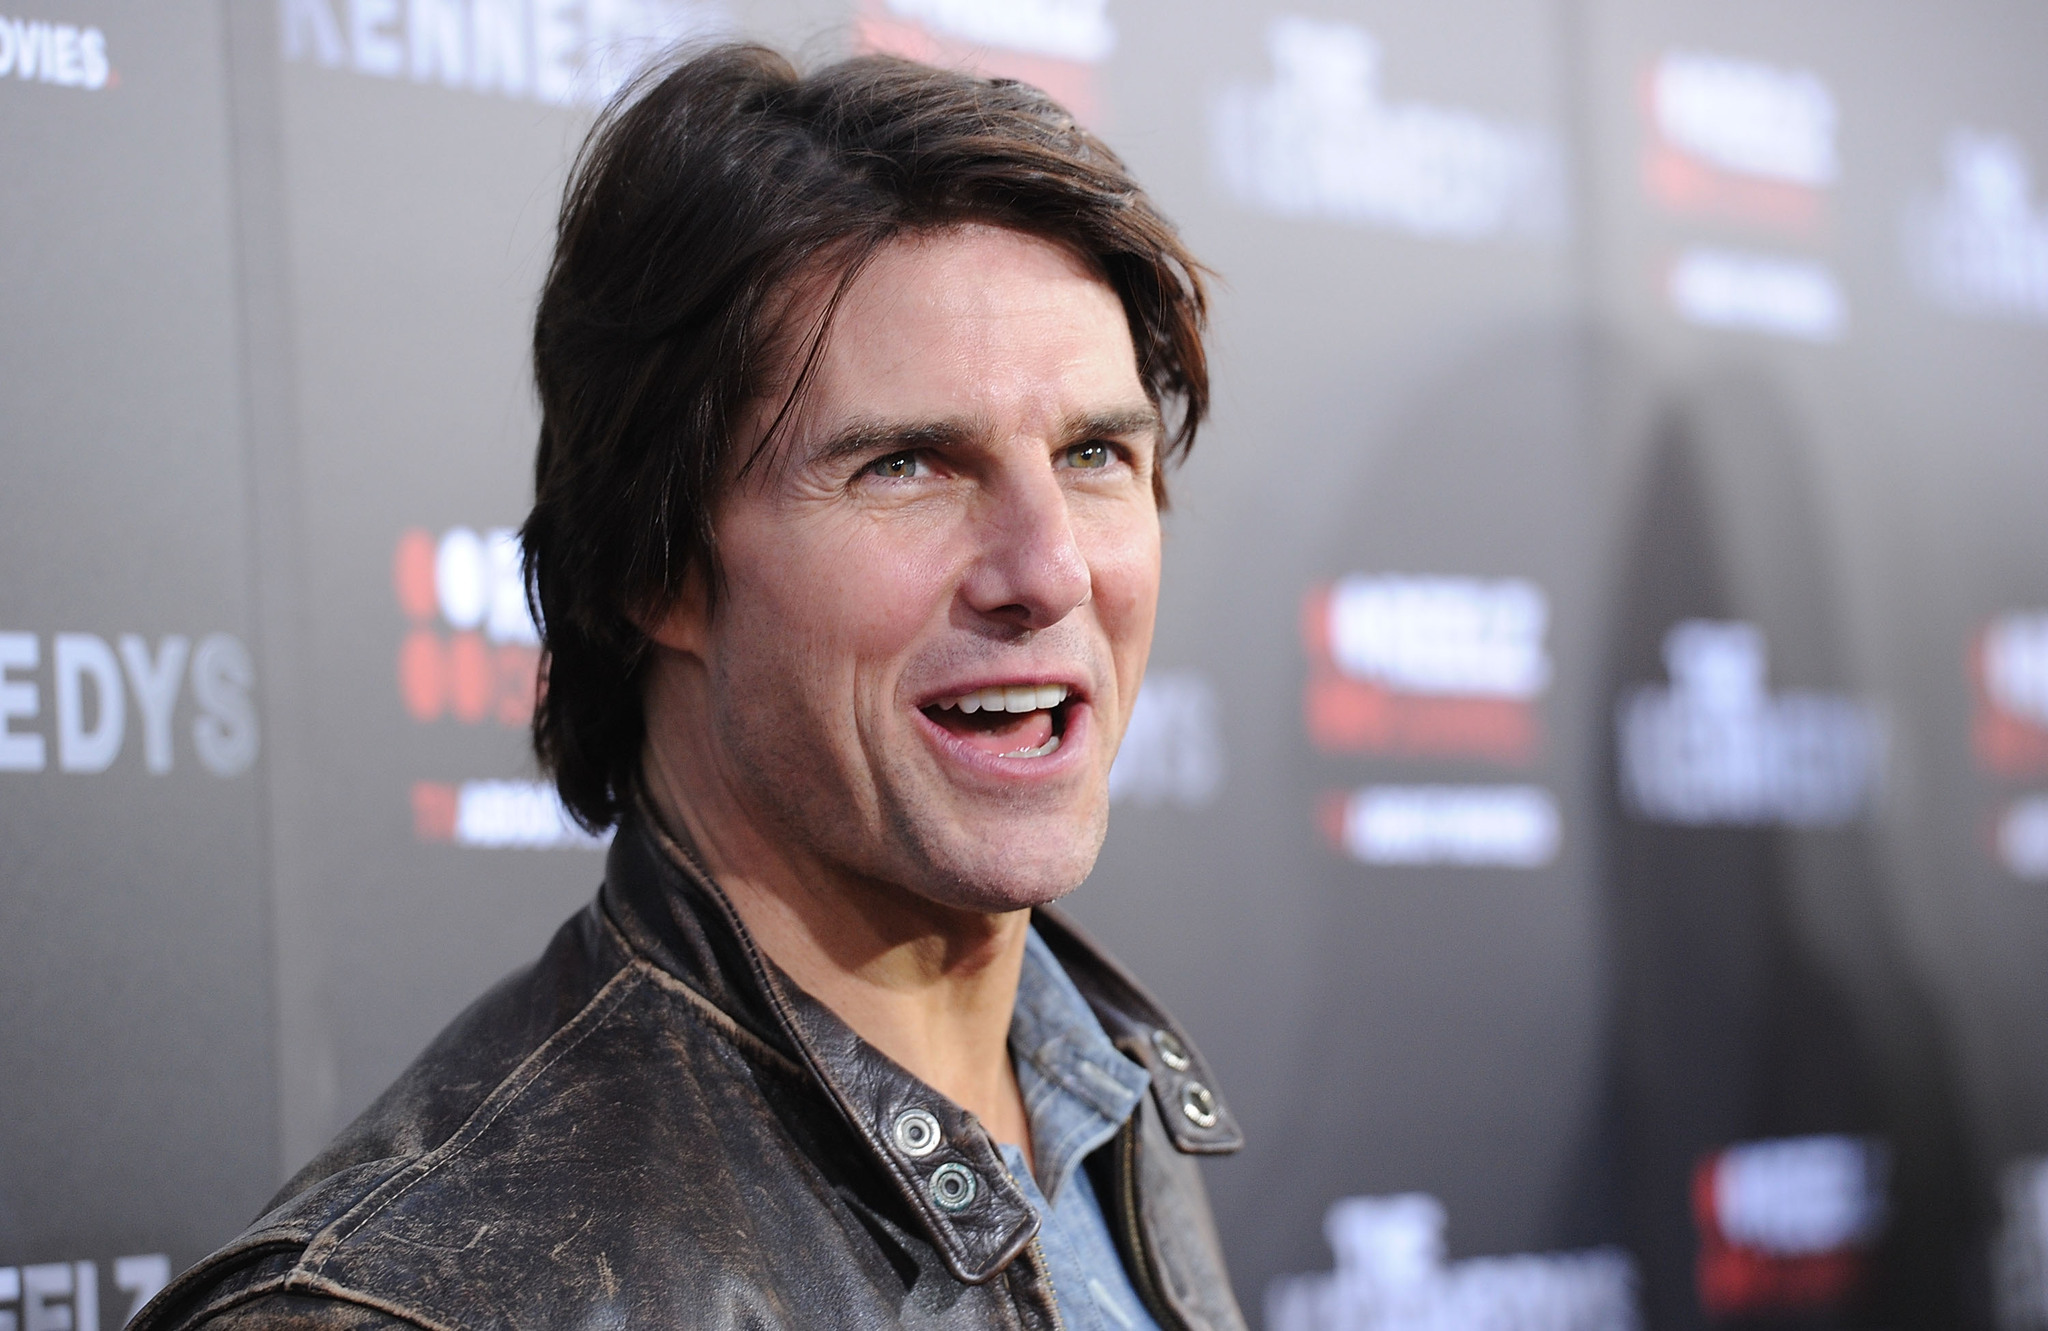 Tom Cruise at event of The Kennedys (2011)